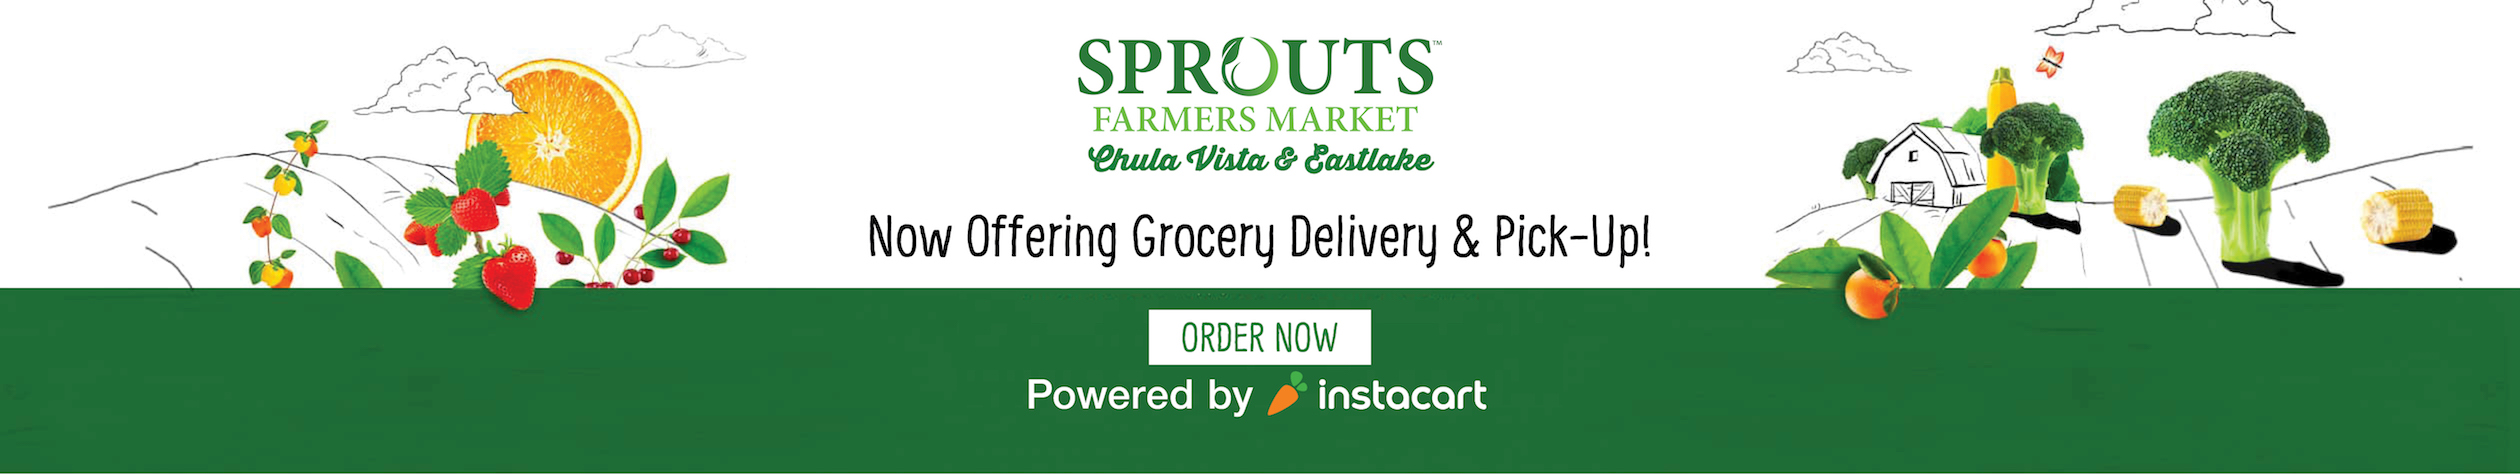 NOW OFFERING GROCERY DELIVERY & PICK-UP